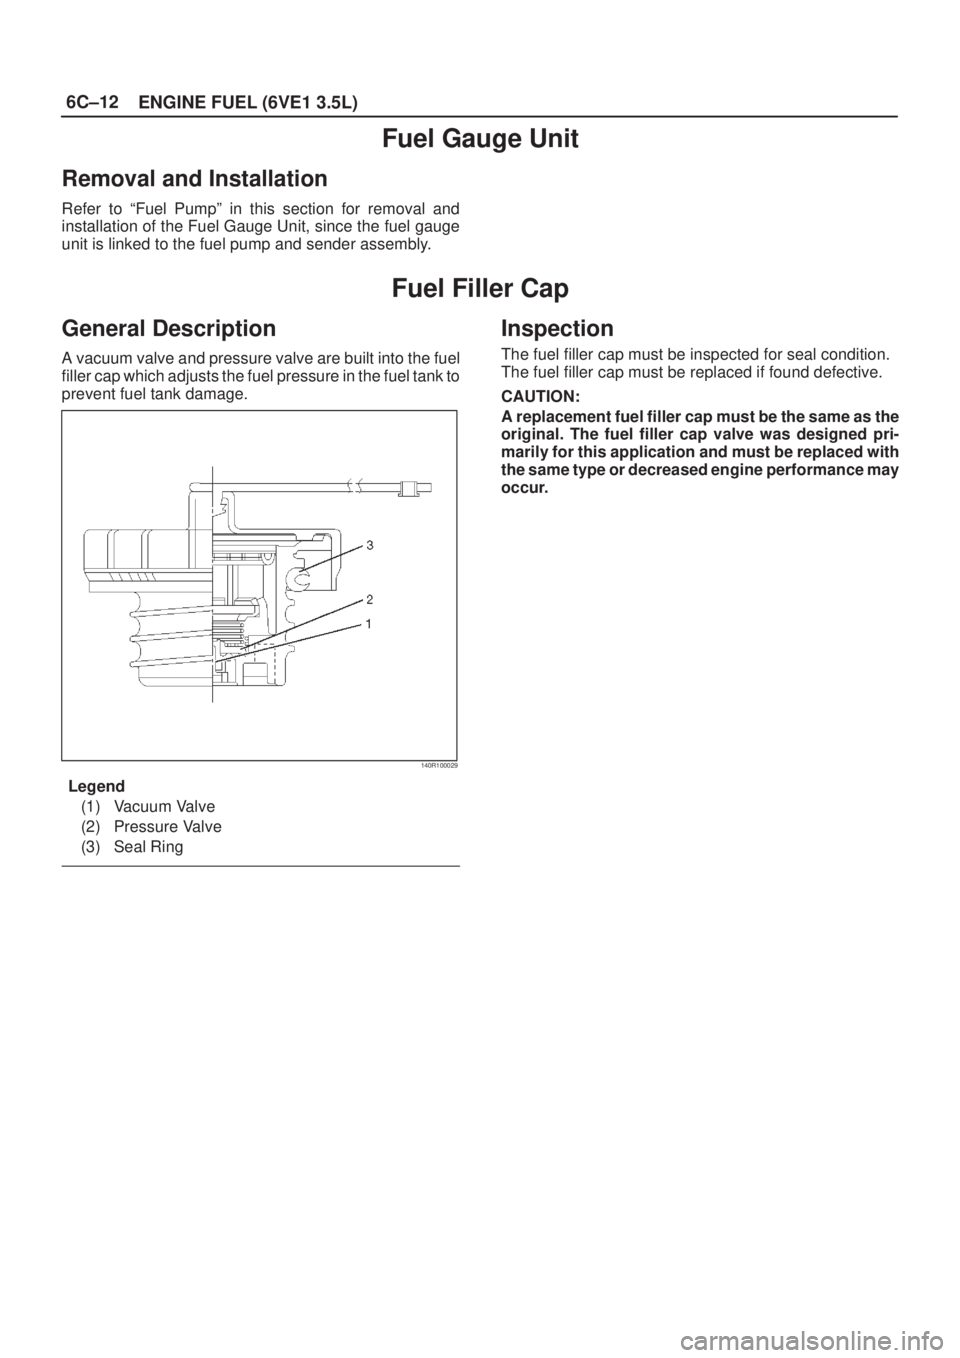 ISUZU AXIOM 2002  Service Repair Manual 6C±12
ENGINE FUEL (6VE1 3.5L)
Fuel Gauge Unit
Removal and Installation
Refer to ªFuel Pumpº in this section for removal and
installation of the Fuel Gauge Unit, since the fuel gauge
unit is linked 